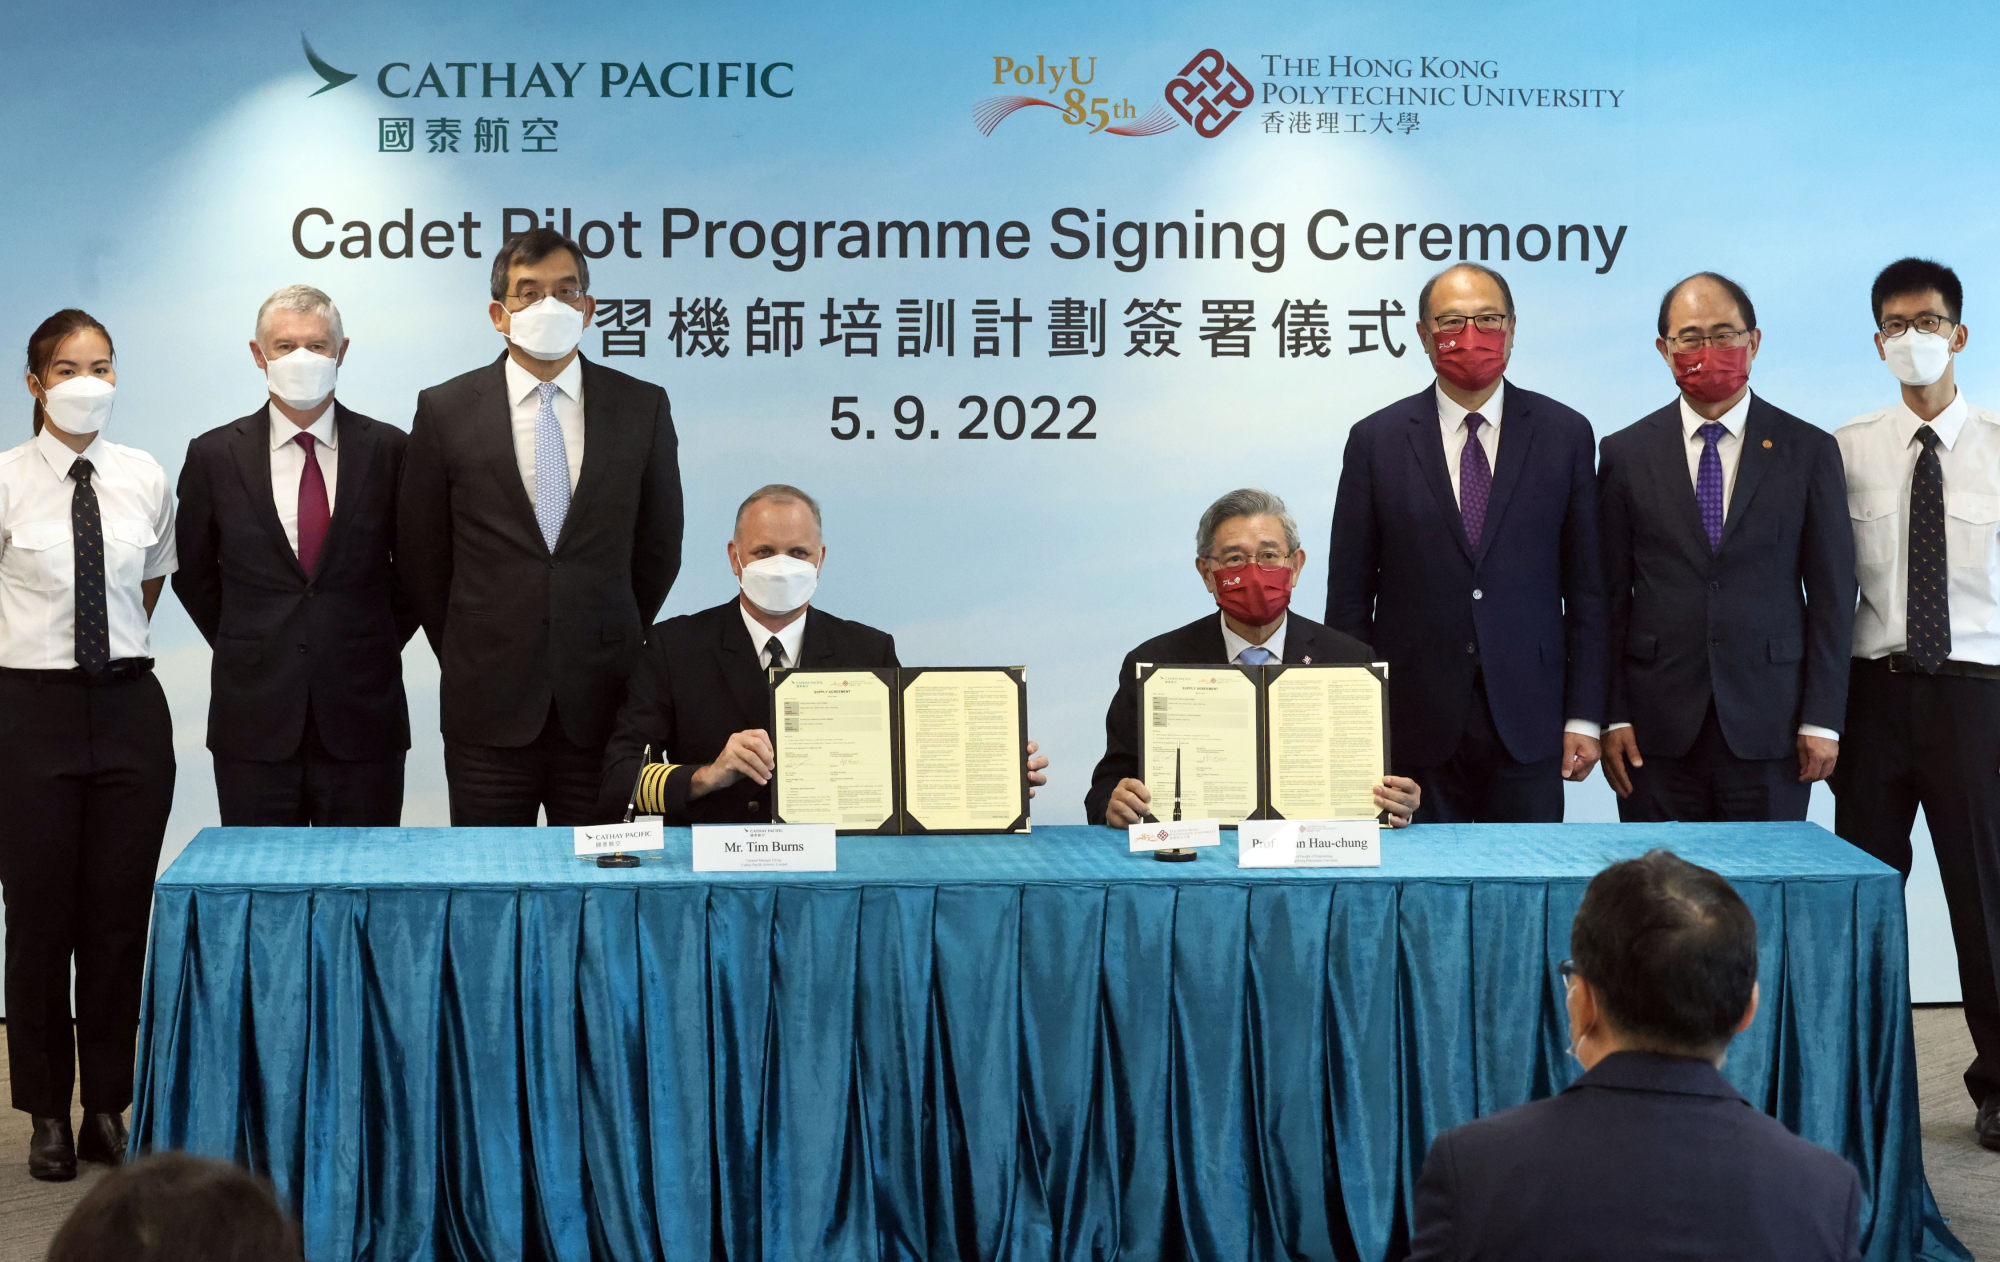 cathay-pacific-seeks-to-hire-400-cadet-pilots-by-end-of-2023-as-it-signs-3-year-training-deal